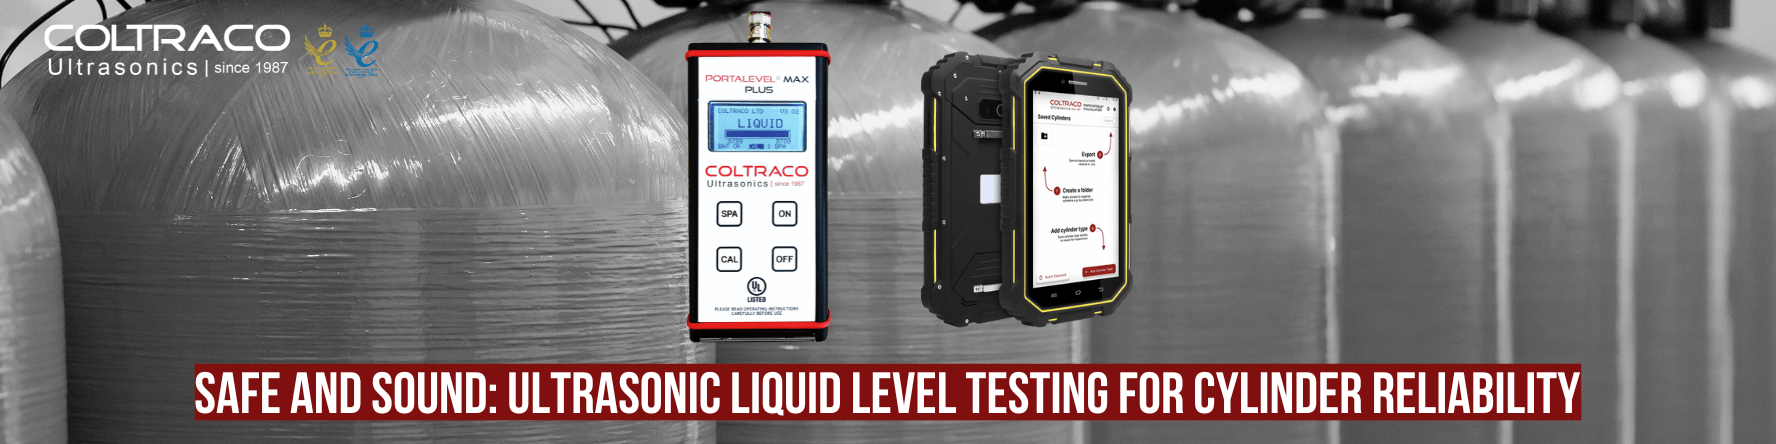 Safe and Sound: Ultrasonic Liquid Level Testing for Cylinder Reliability